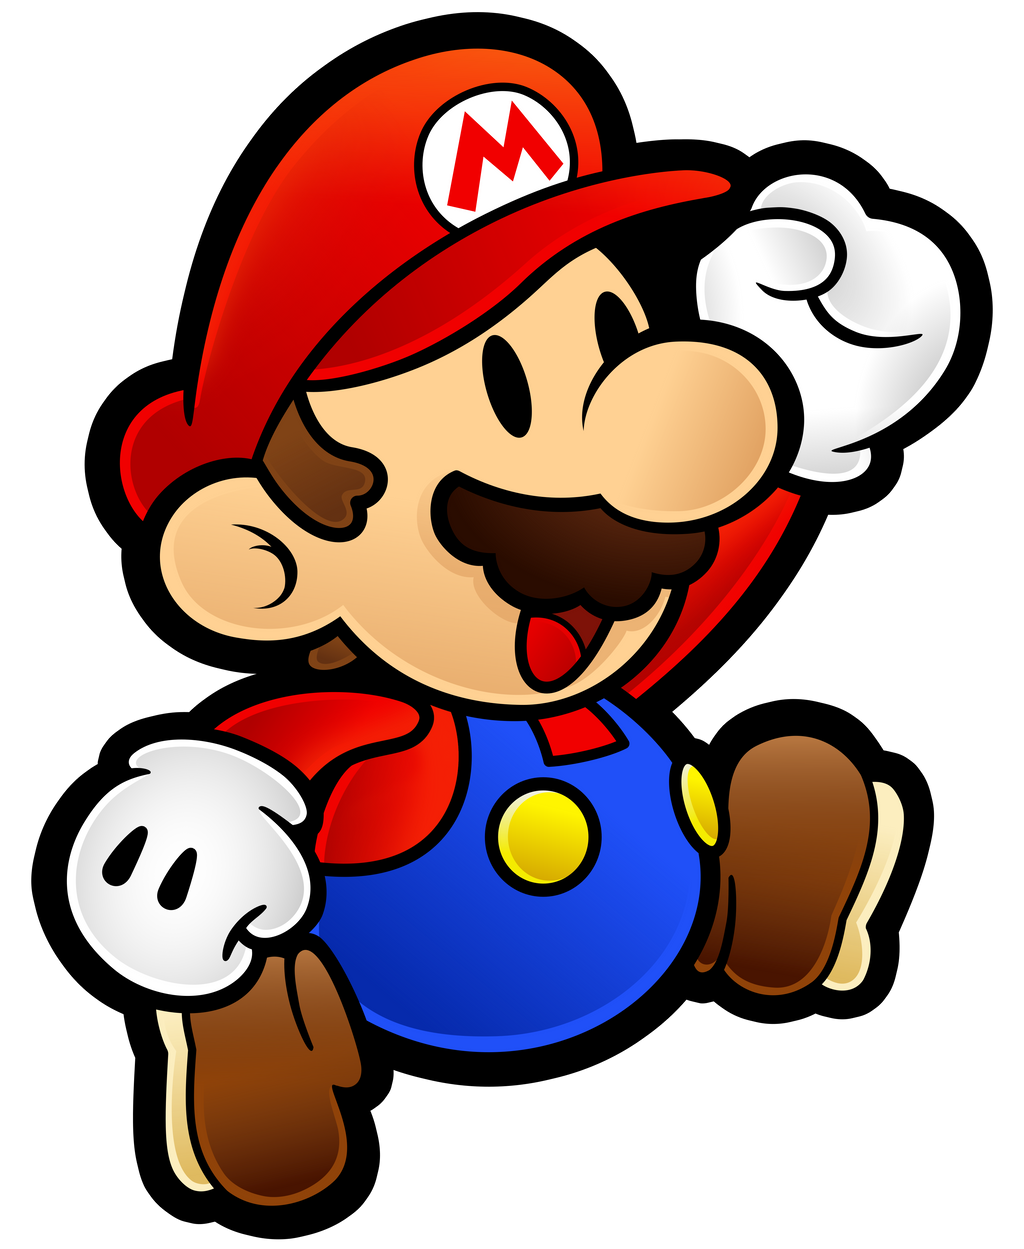 paper_mario__jumping__remake_by_fawfulthegreat64-dci6r36.png